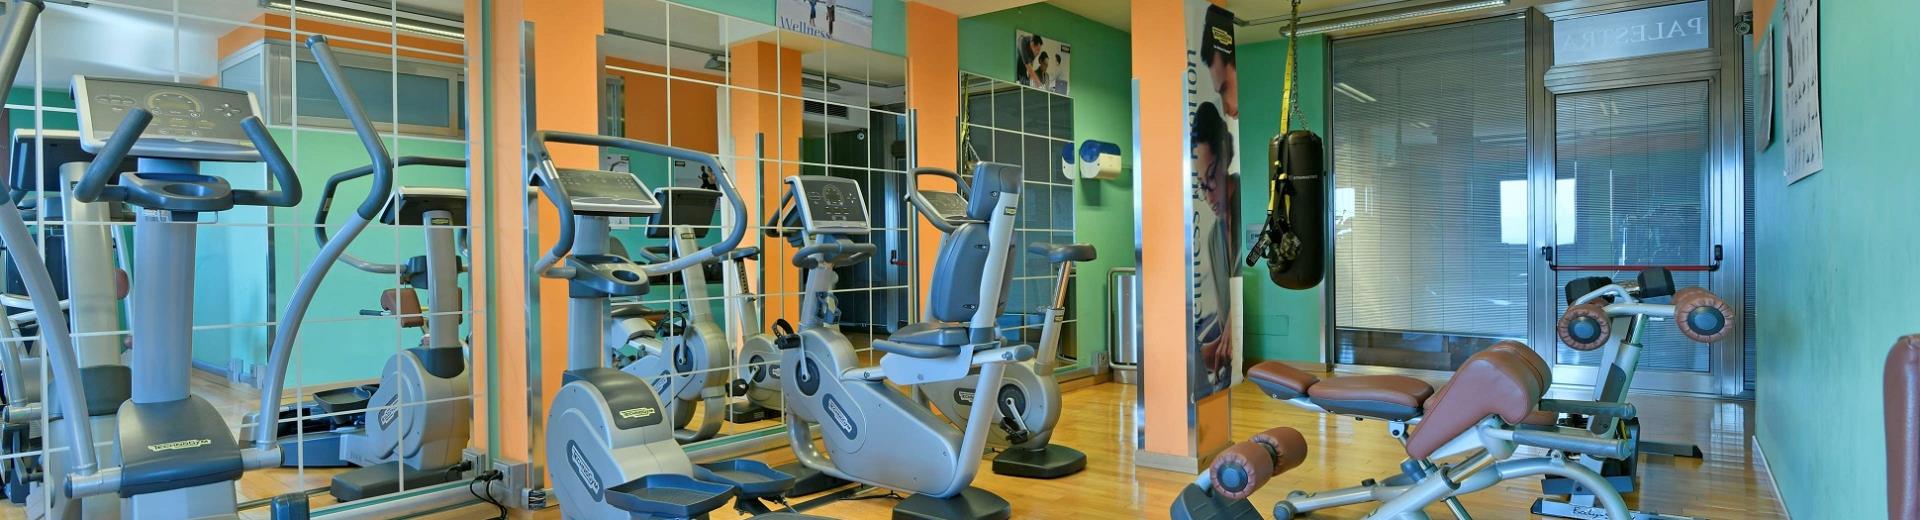 Even when you travel do you want to keep training? For your next stay in Naples choose a hotel with an equipped fitness area: choose Hotel Ferrari!